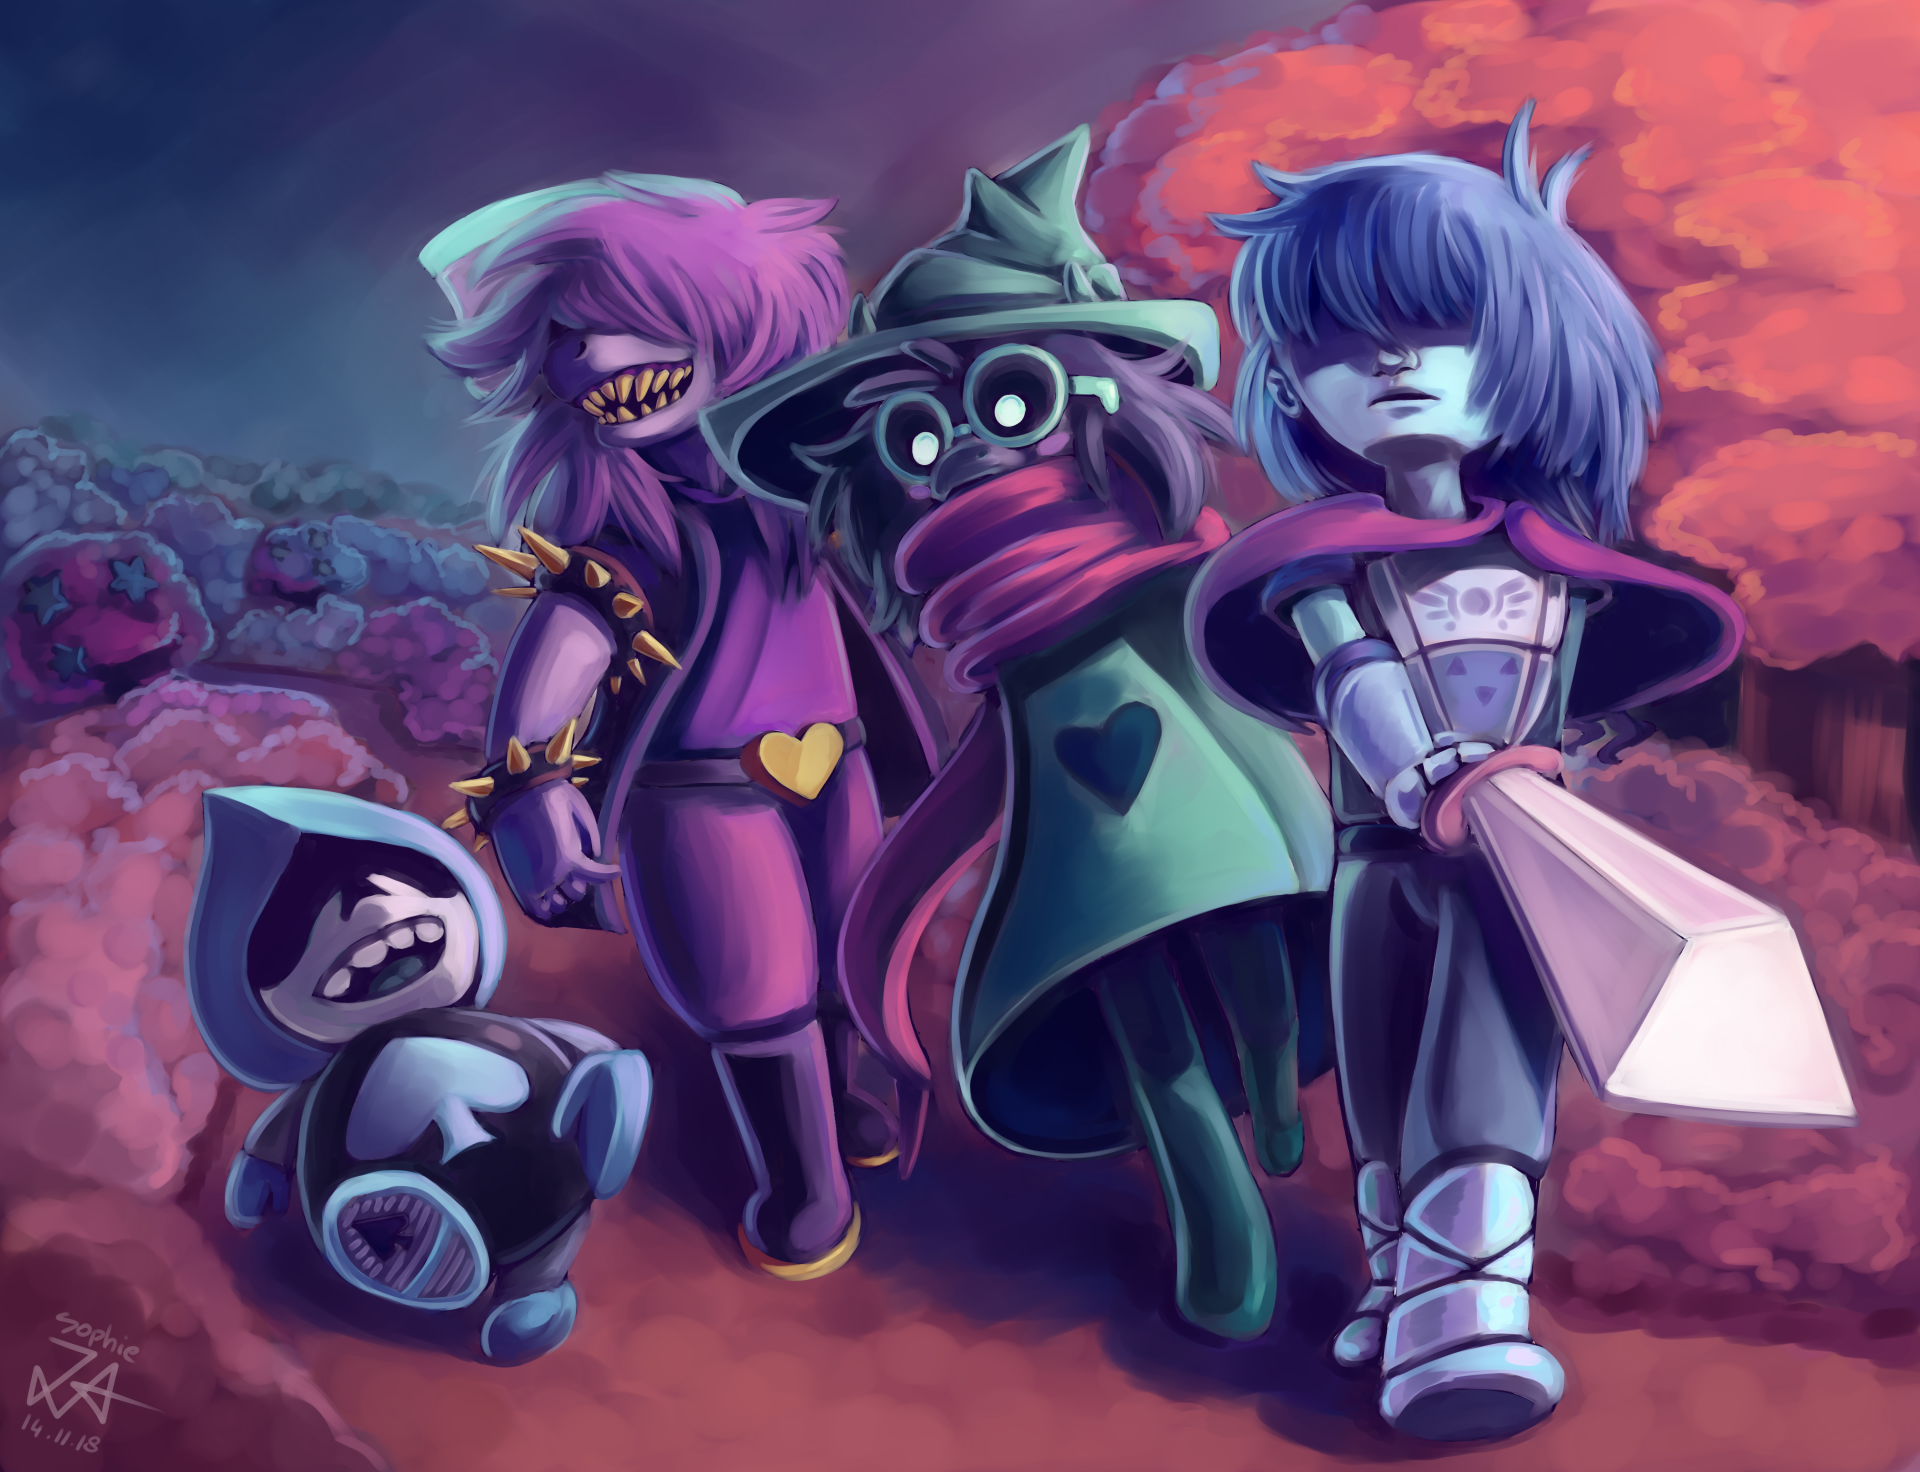 deltarune download android